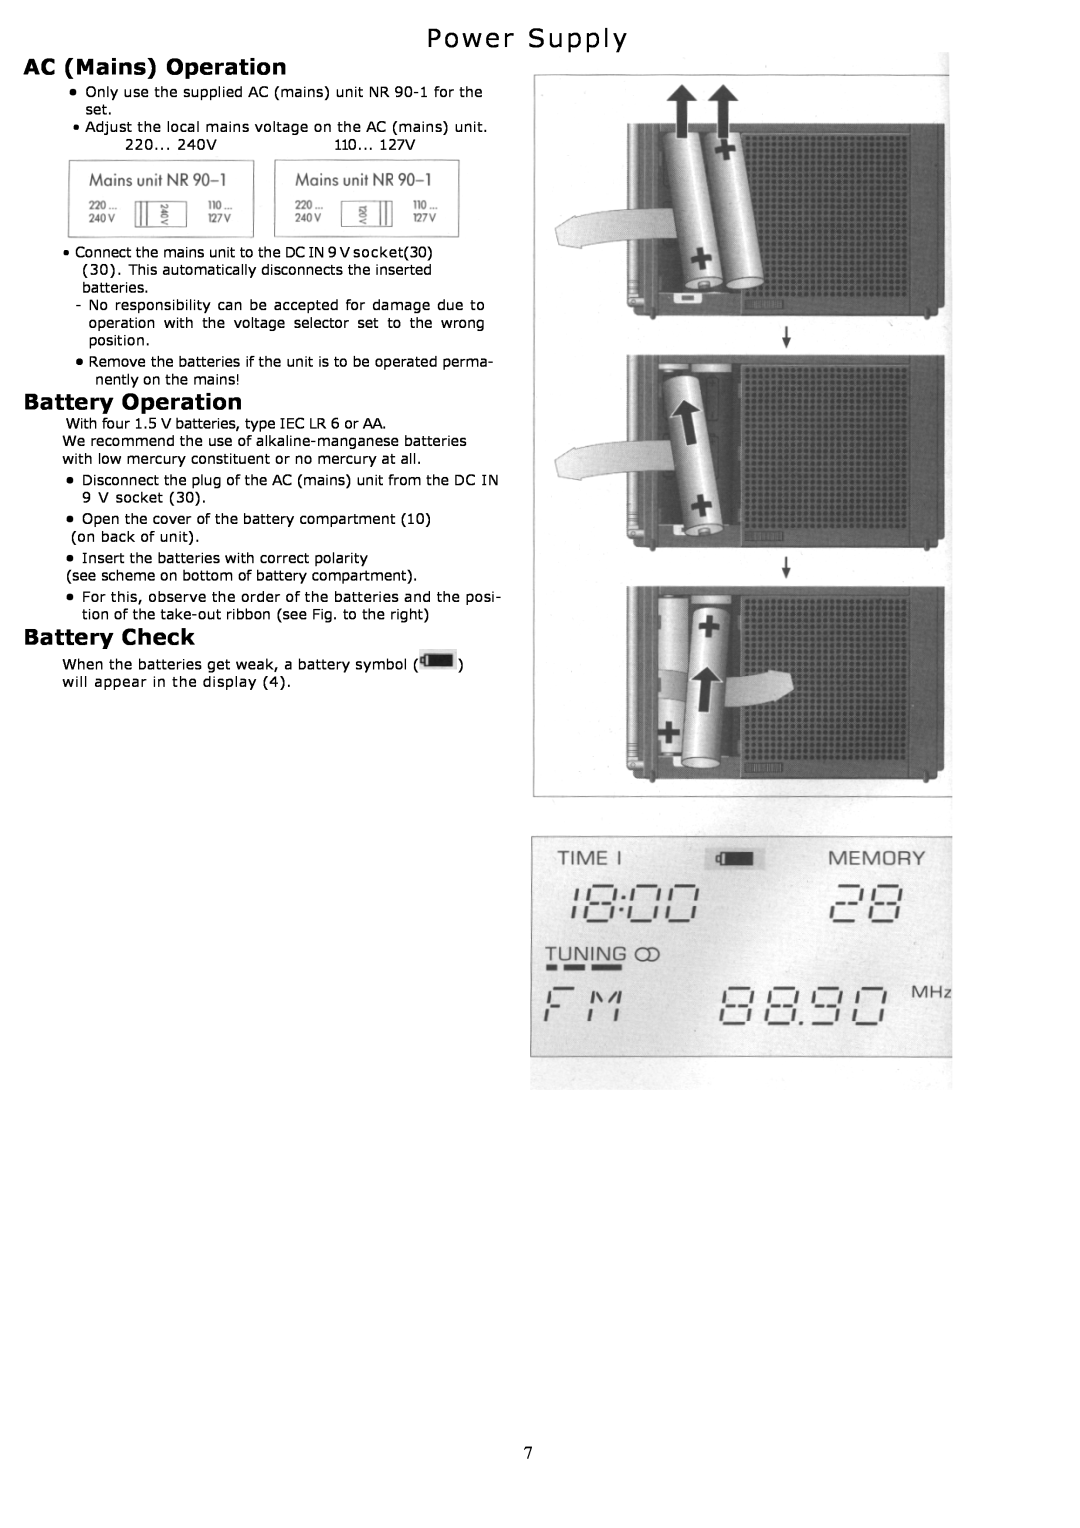 Grundig YB500 owner manual Power Supply, AC Mains Operation, Battery Operation, Battery Check 